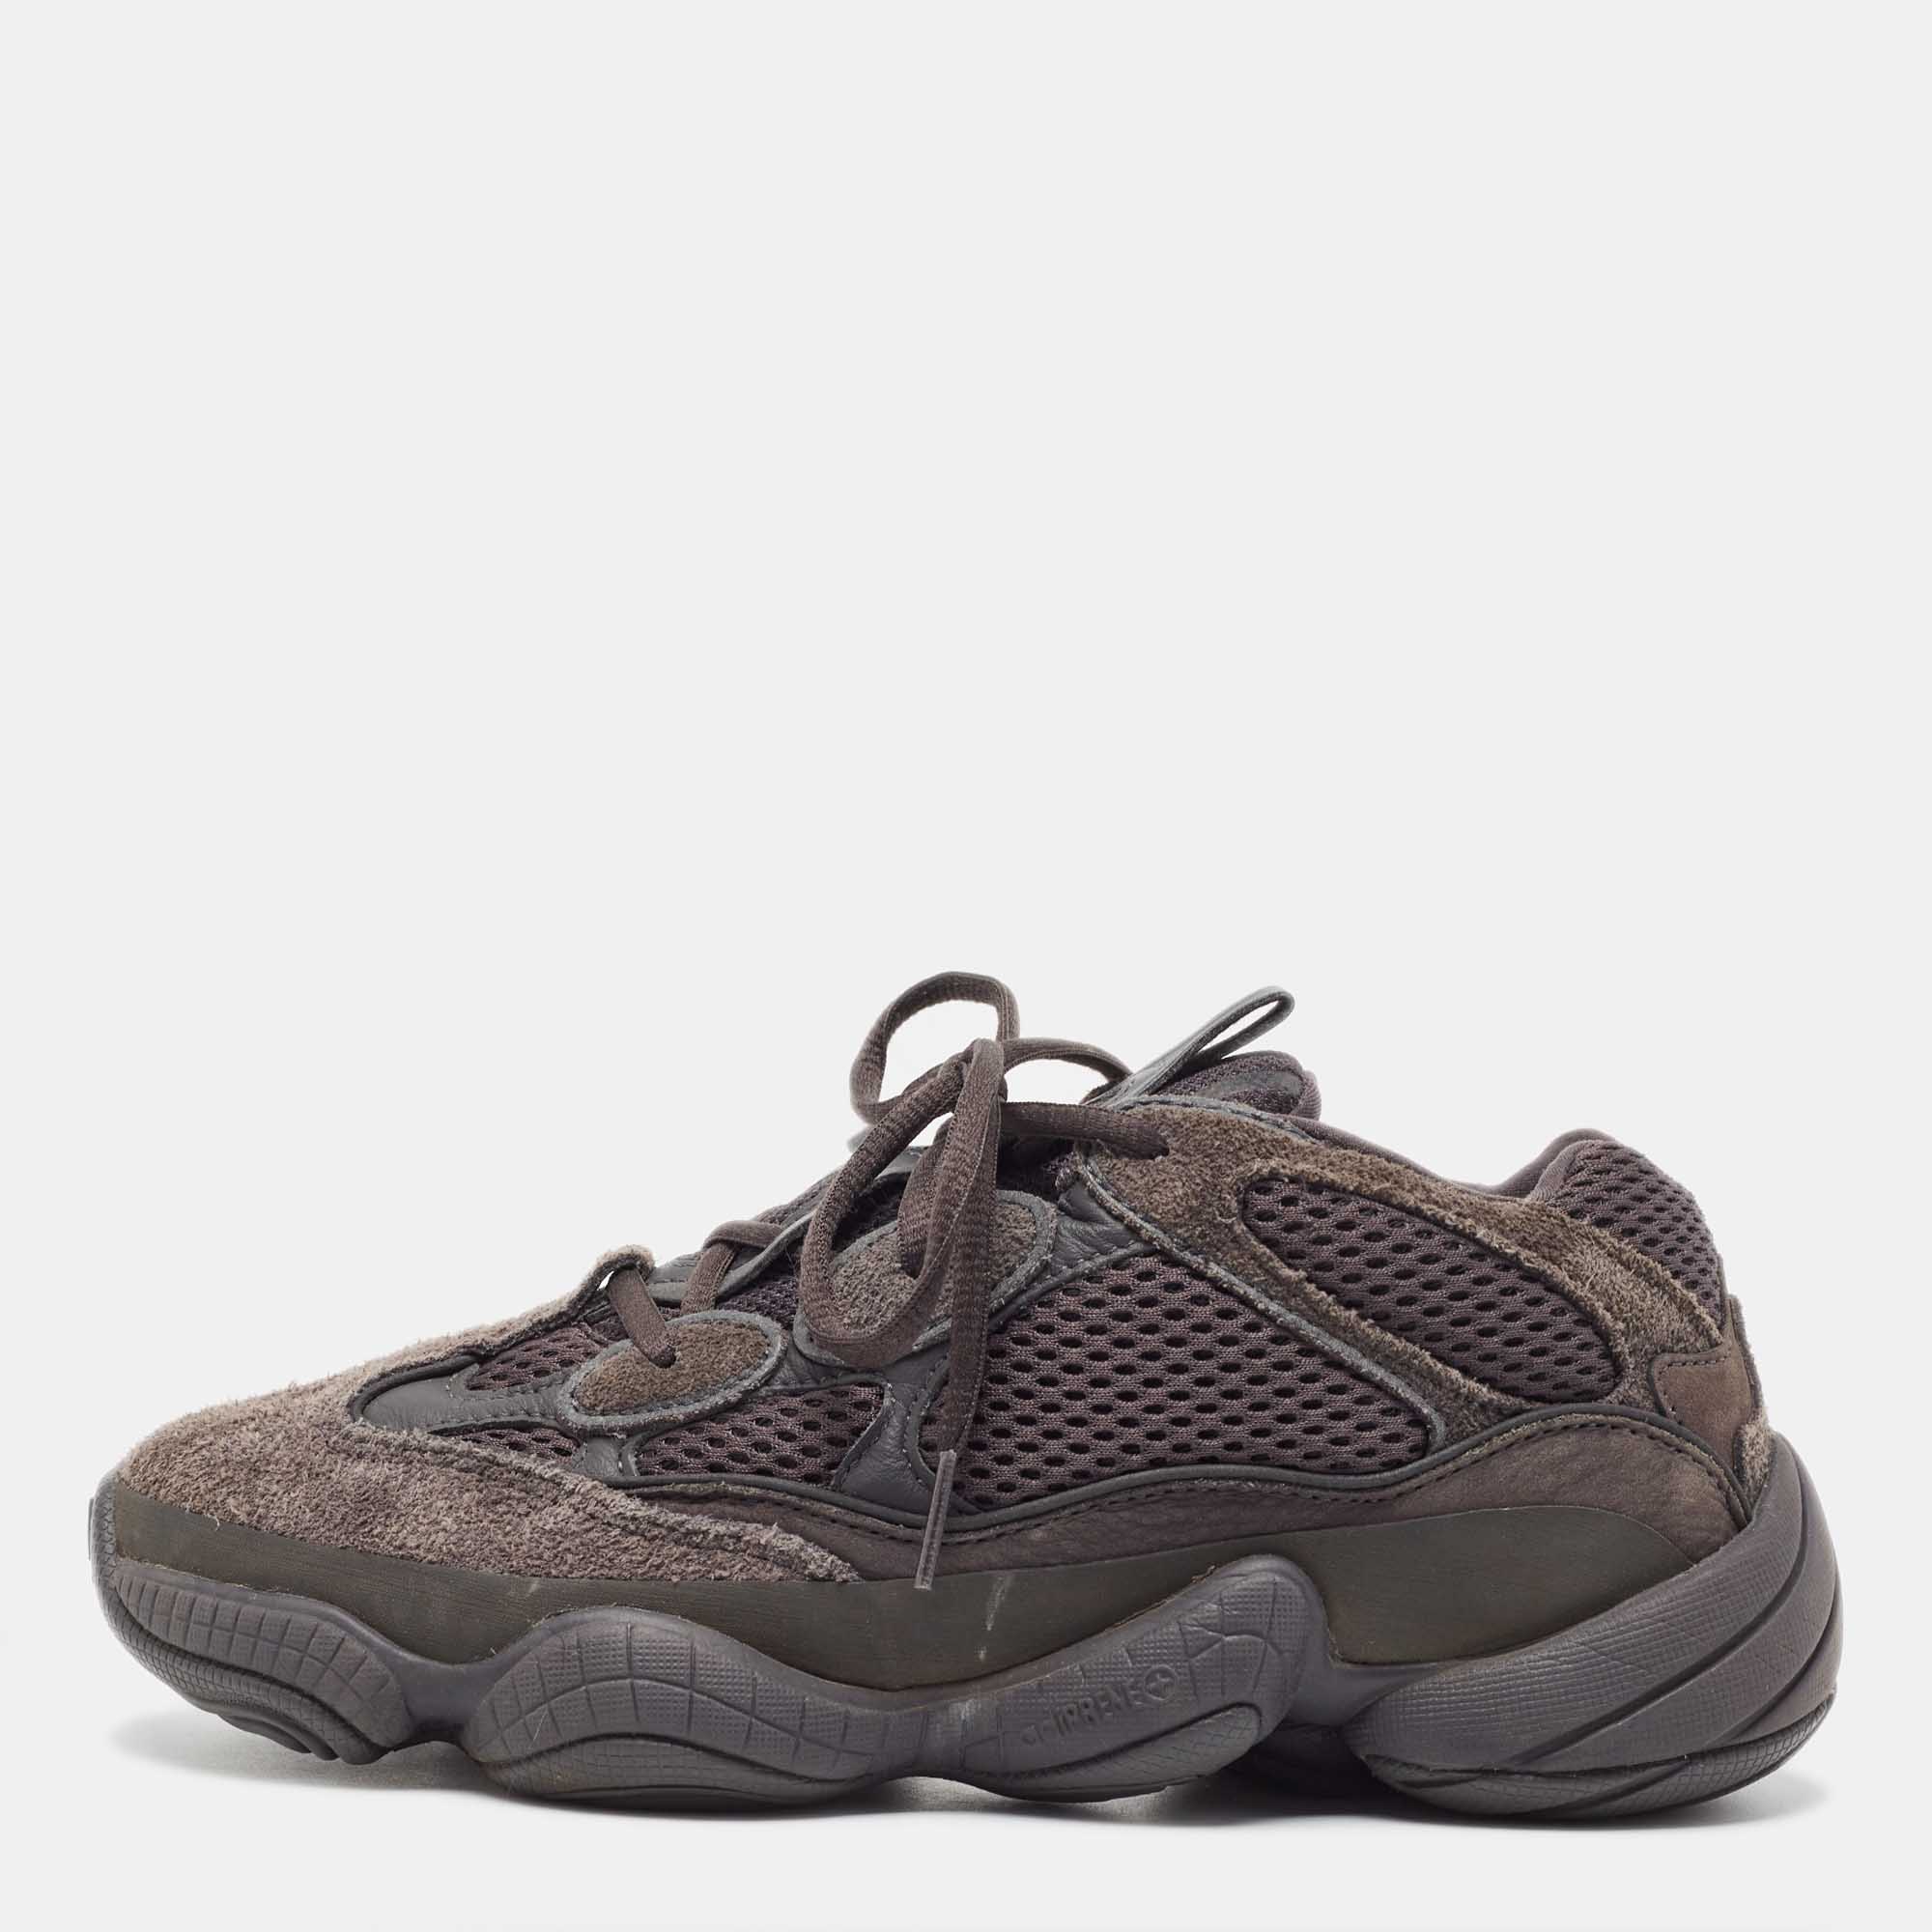 Pre-owned Yeezy X Adidas Adidas X Yeezy Black Mesh And Suede Boost Yeezy 500-utility-black Sneakers Size 40